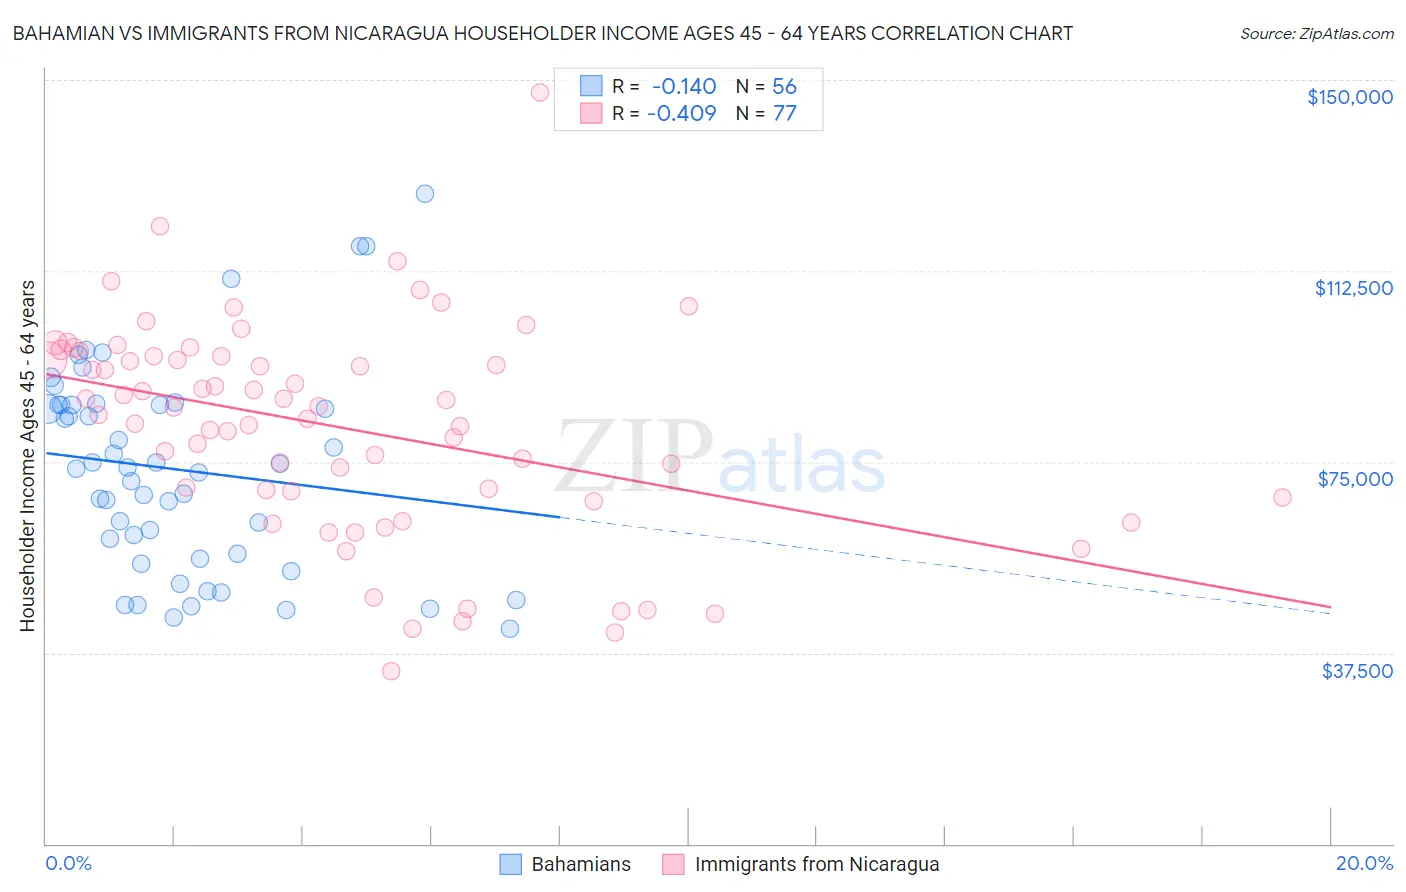 Bahamian vs Immigrants from Nicaragua Householder Income Ages 45 - 64 years